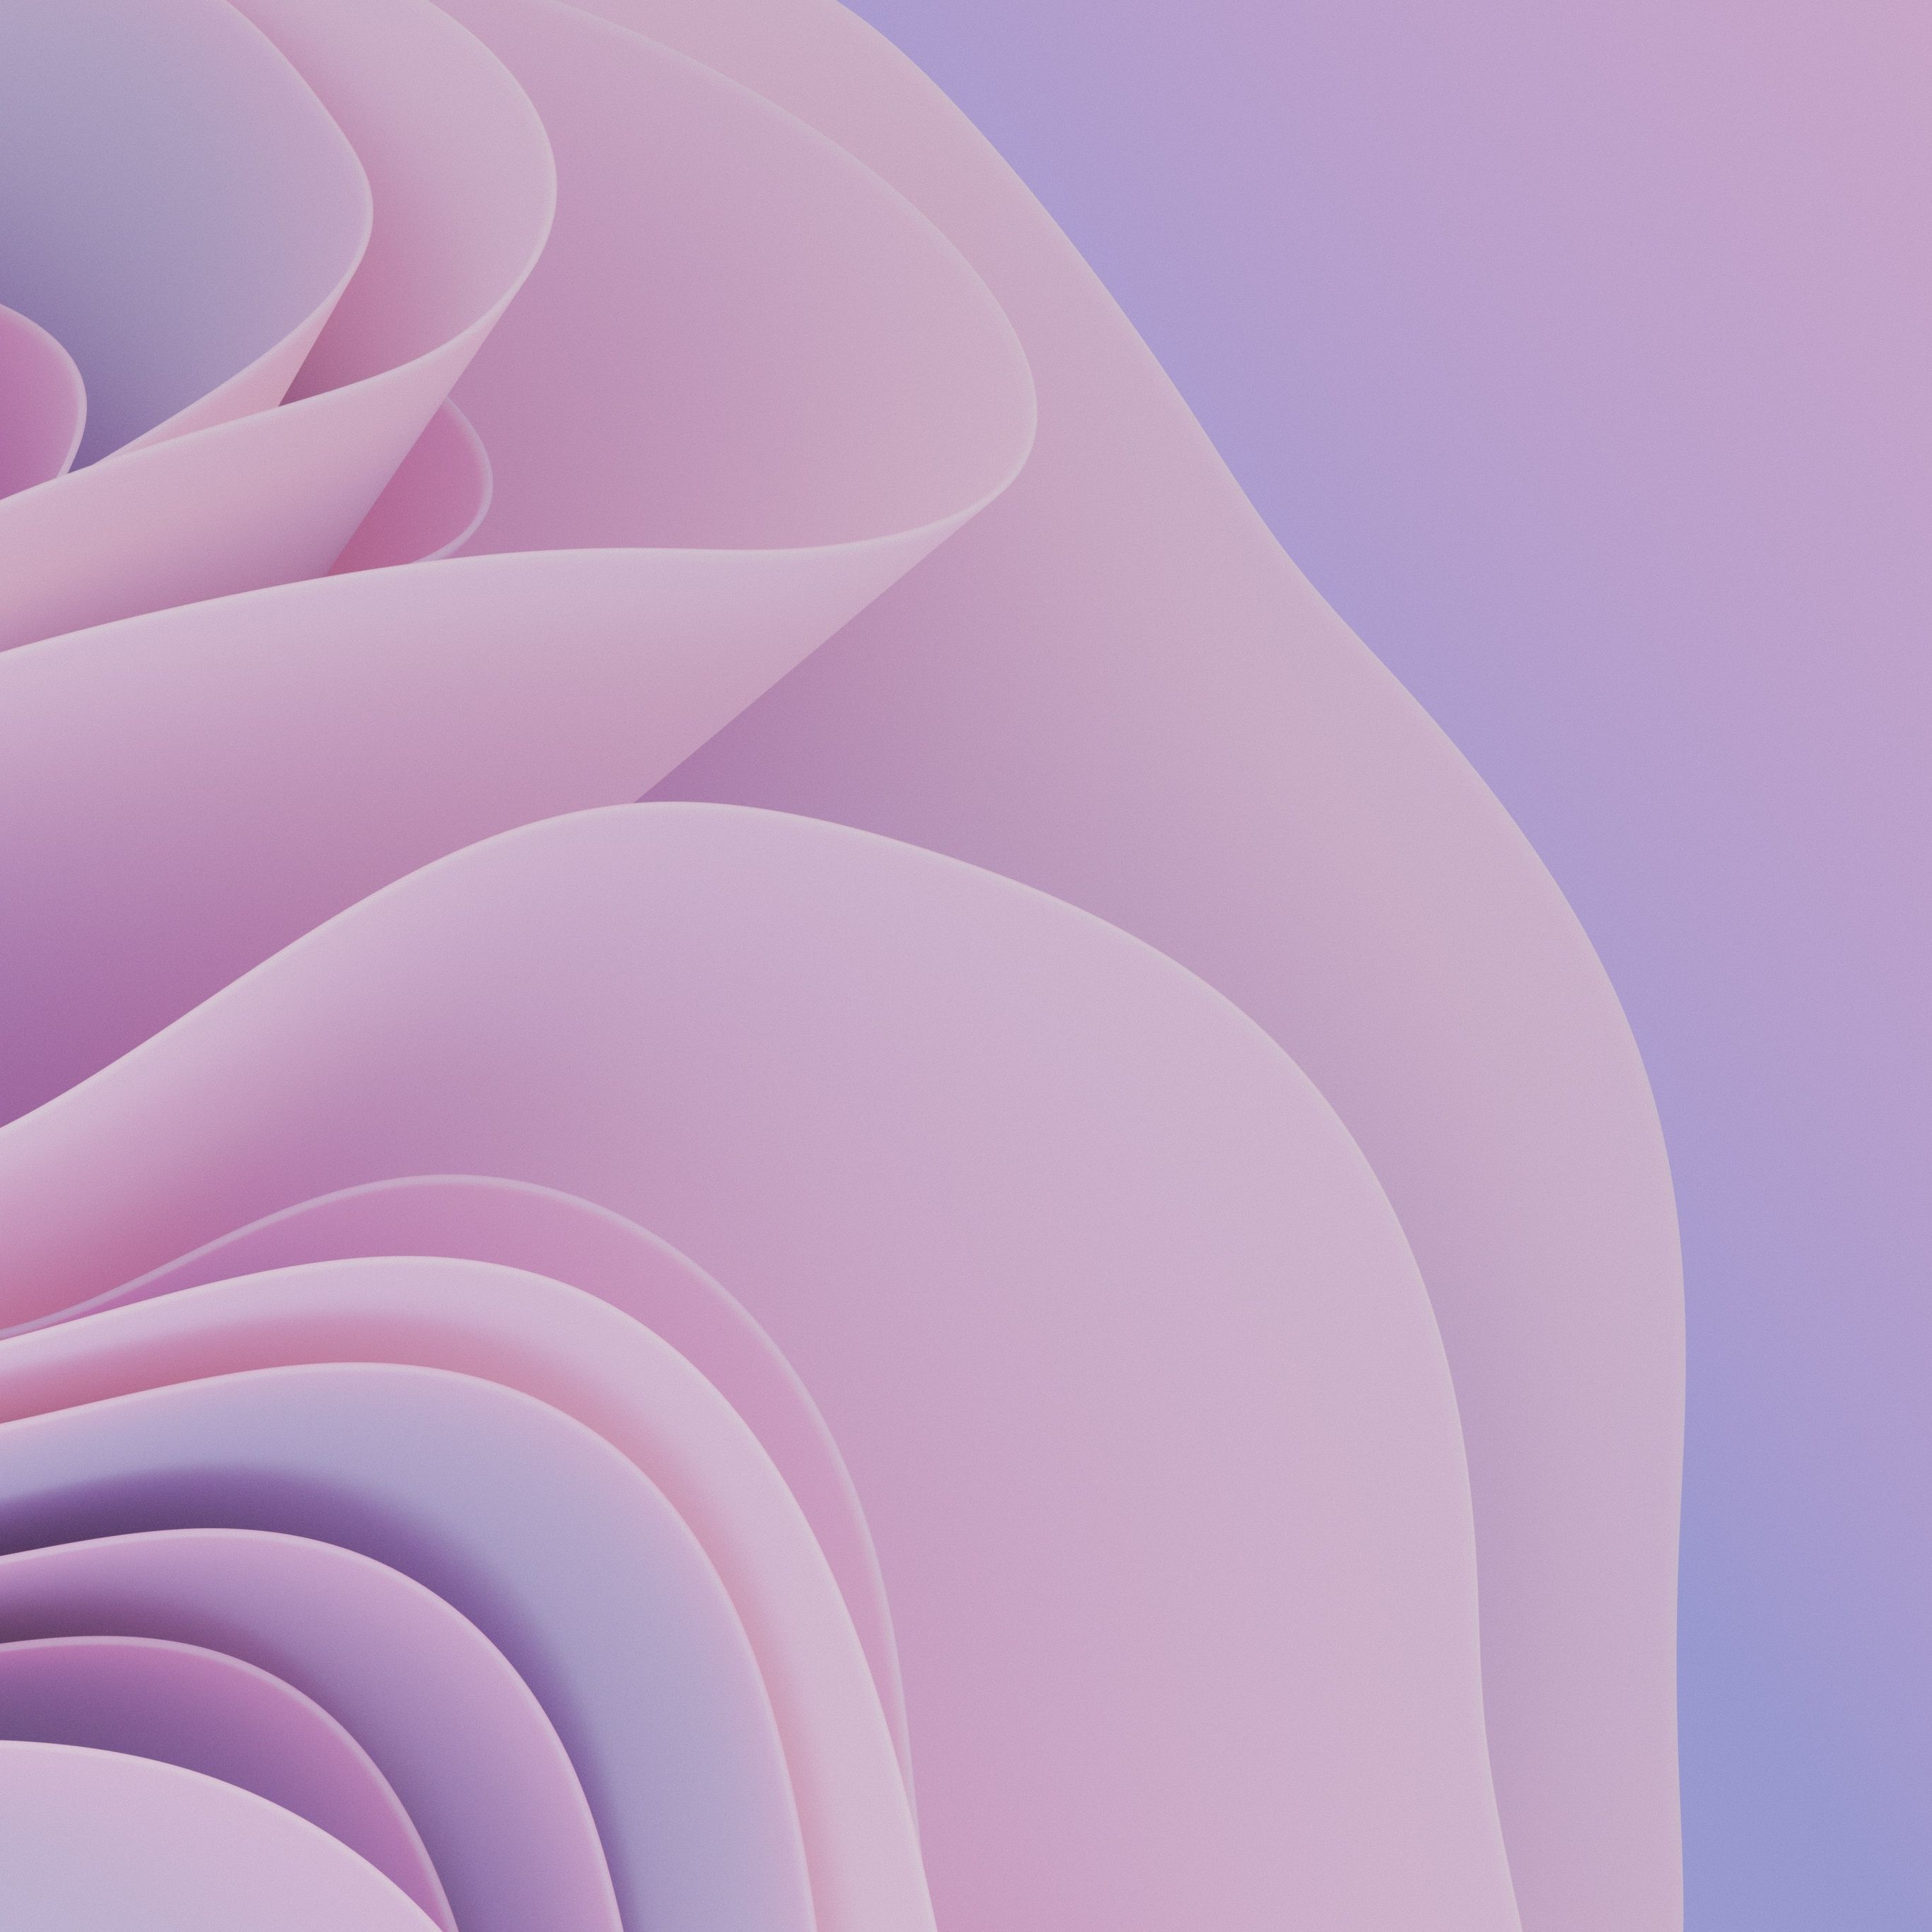 A purple and pink rose on top of blue background - Abstract